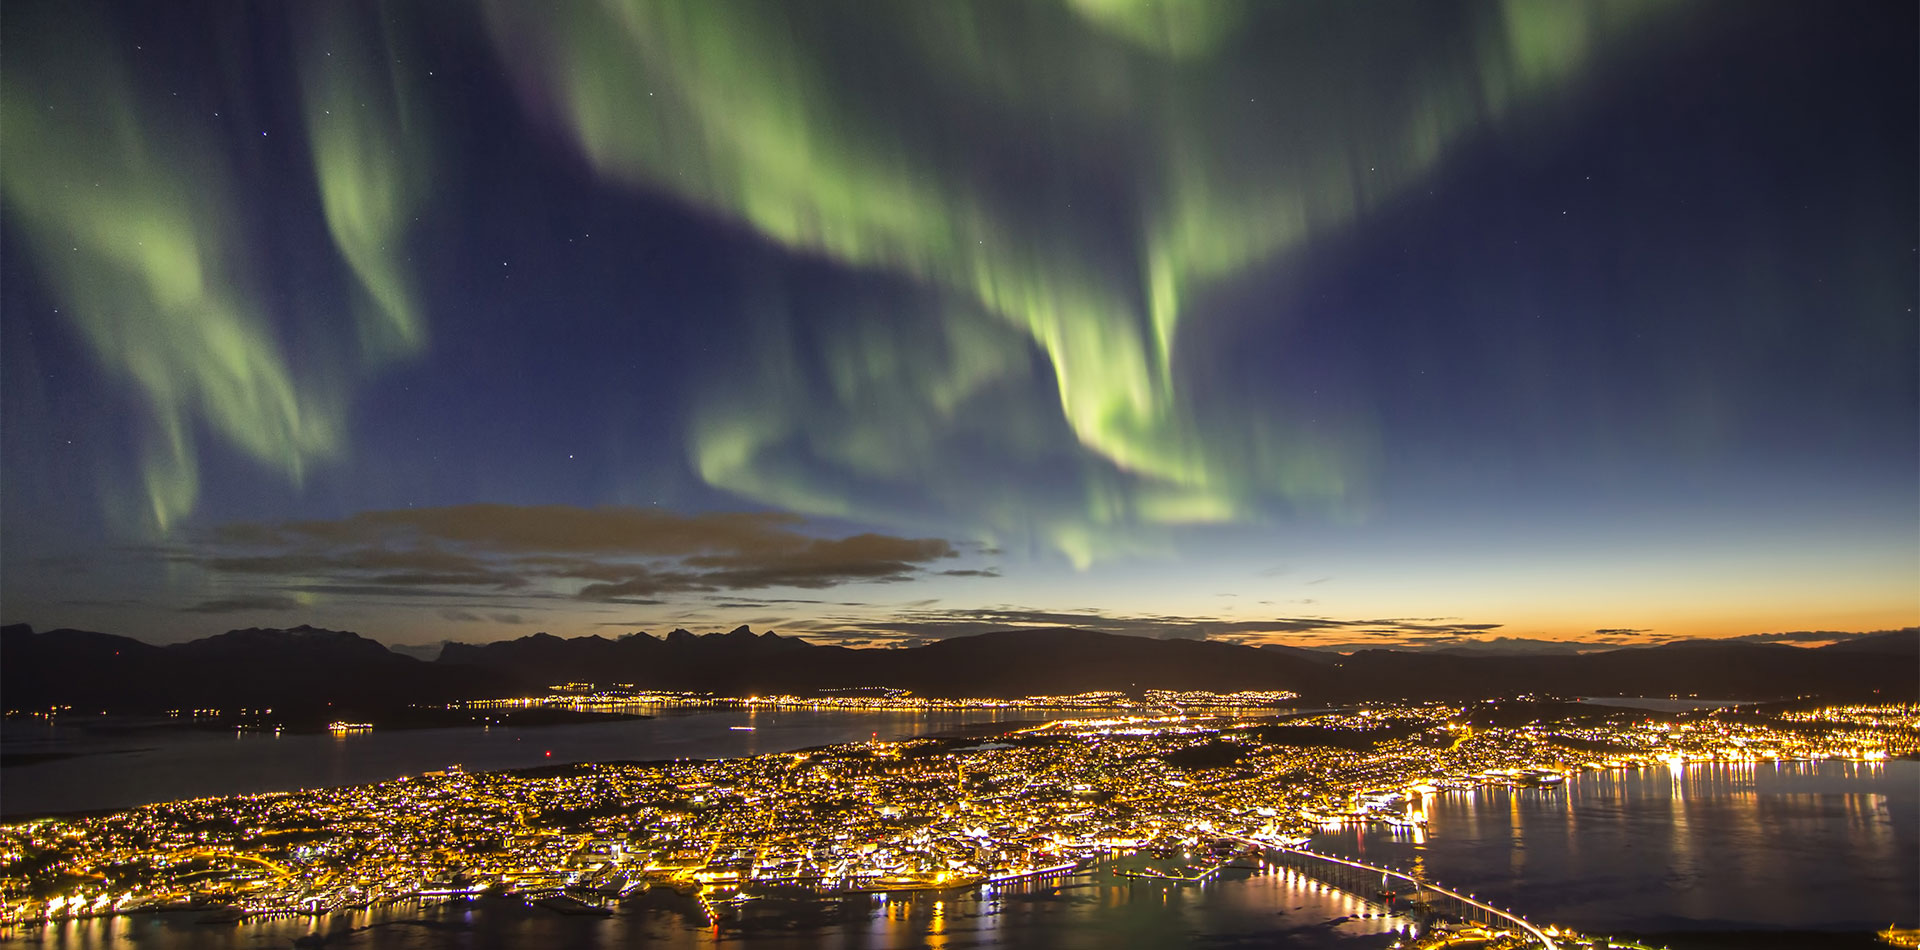 Northern lights over Tromso, Norway